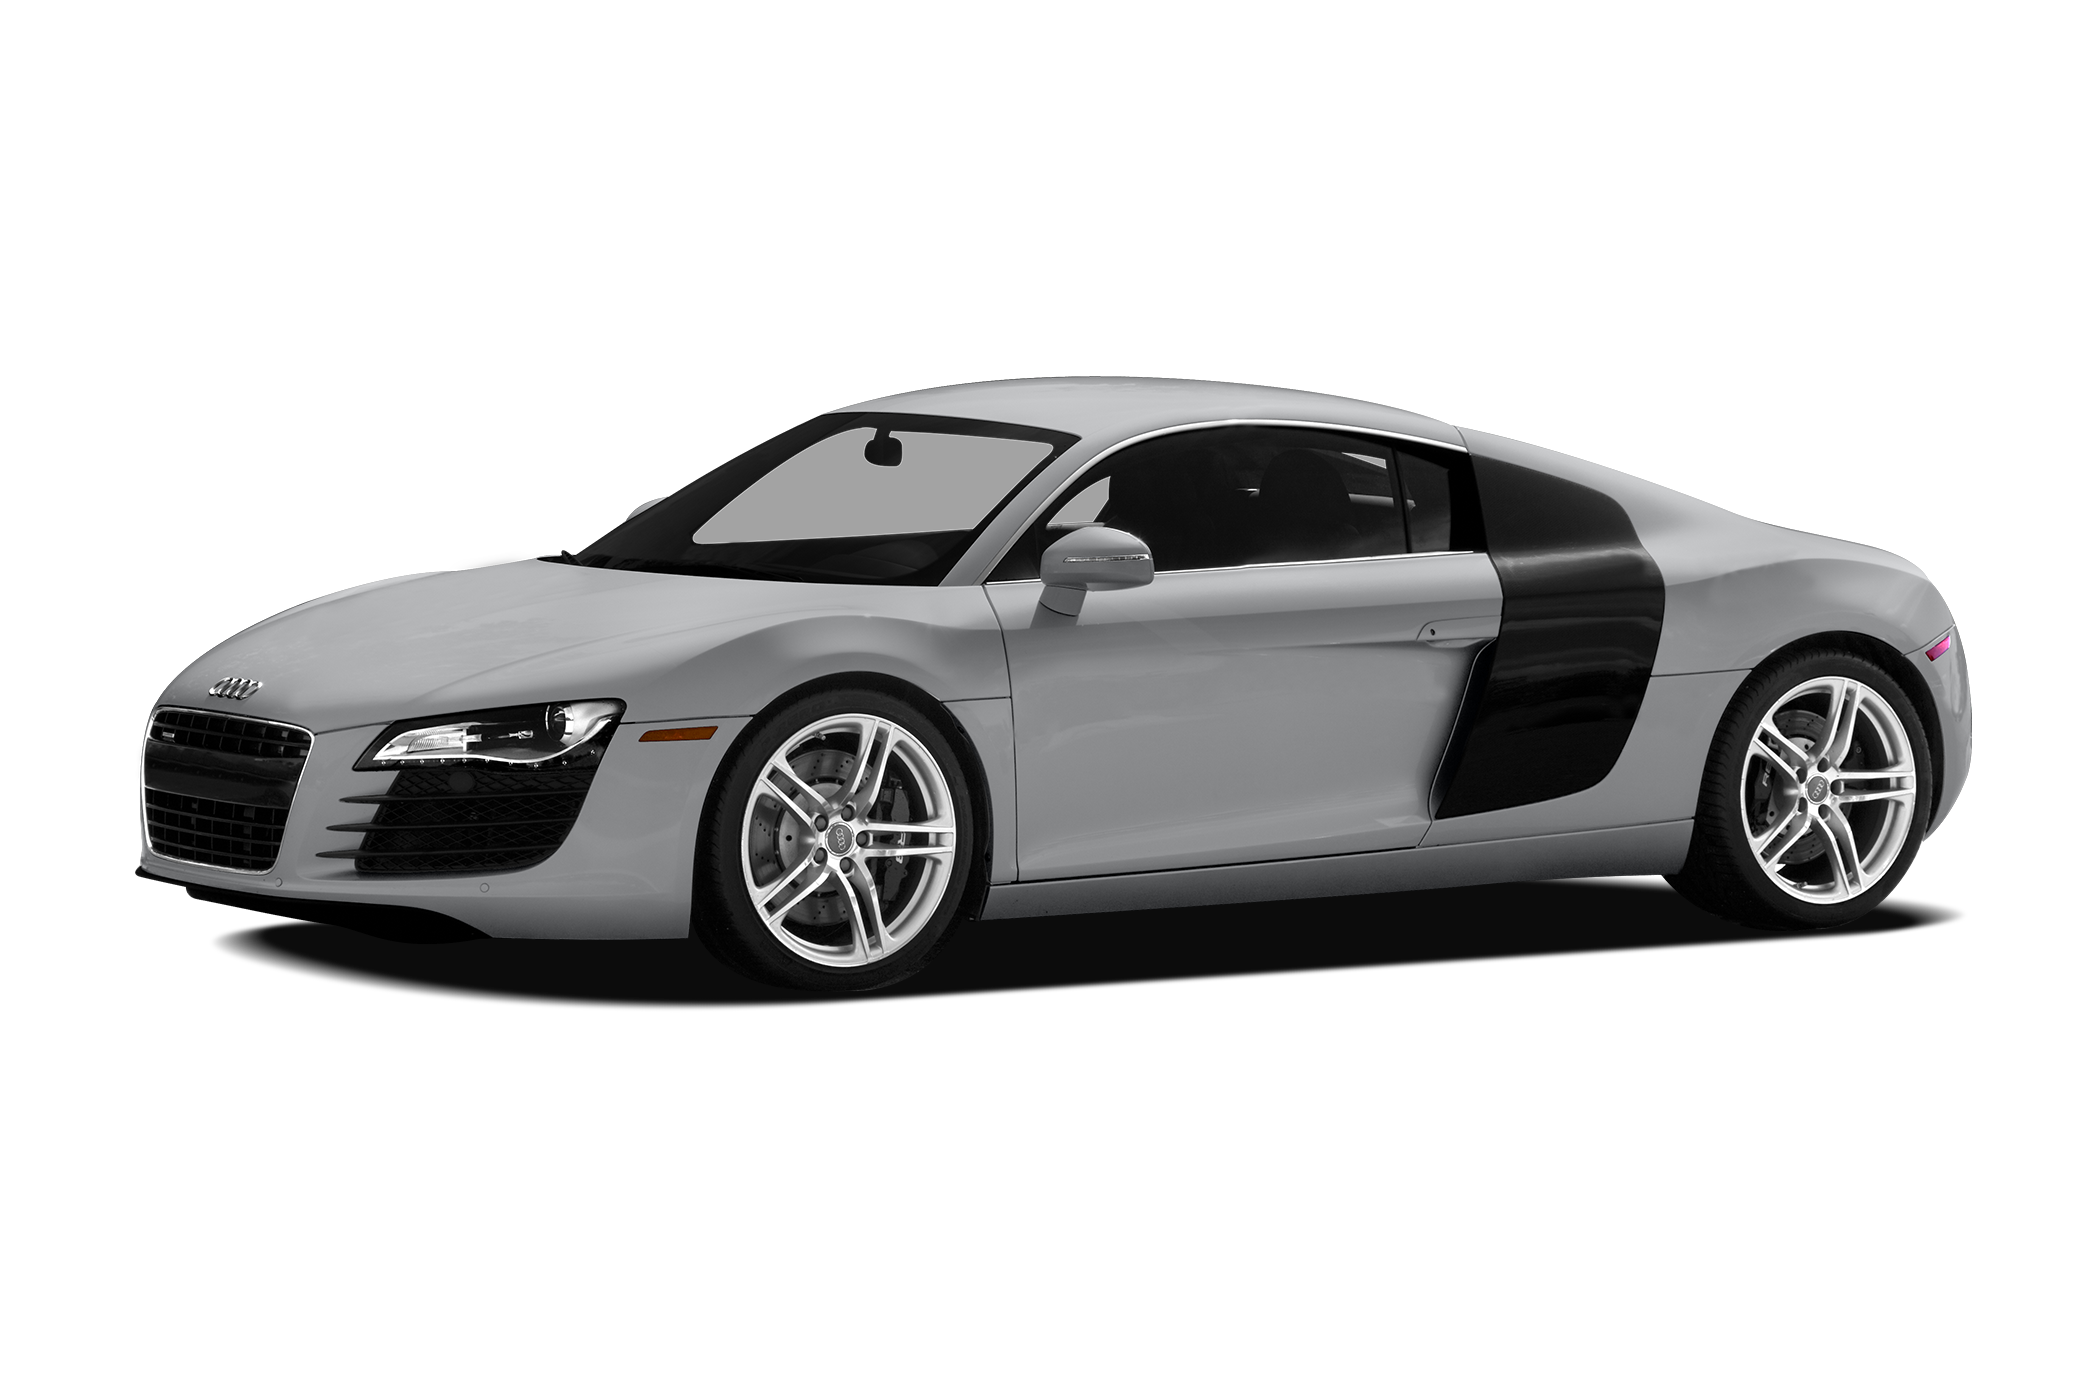 Used 2009 Audi R8 For Sale Near Me 1296